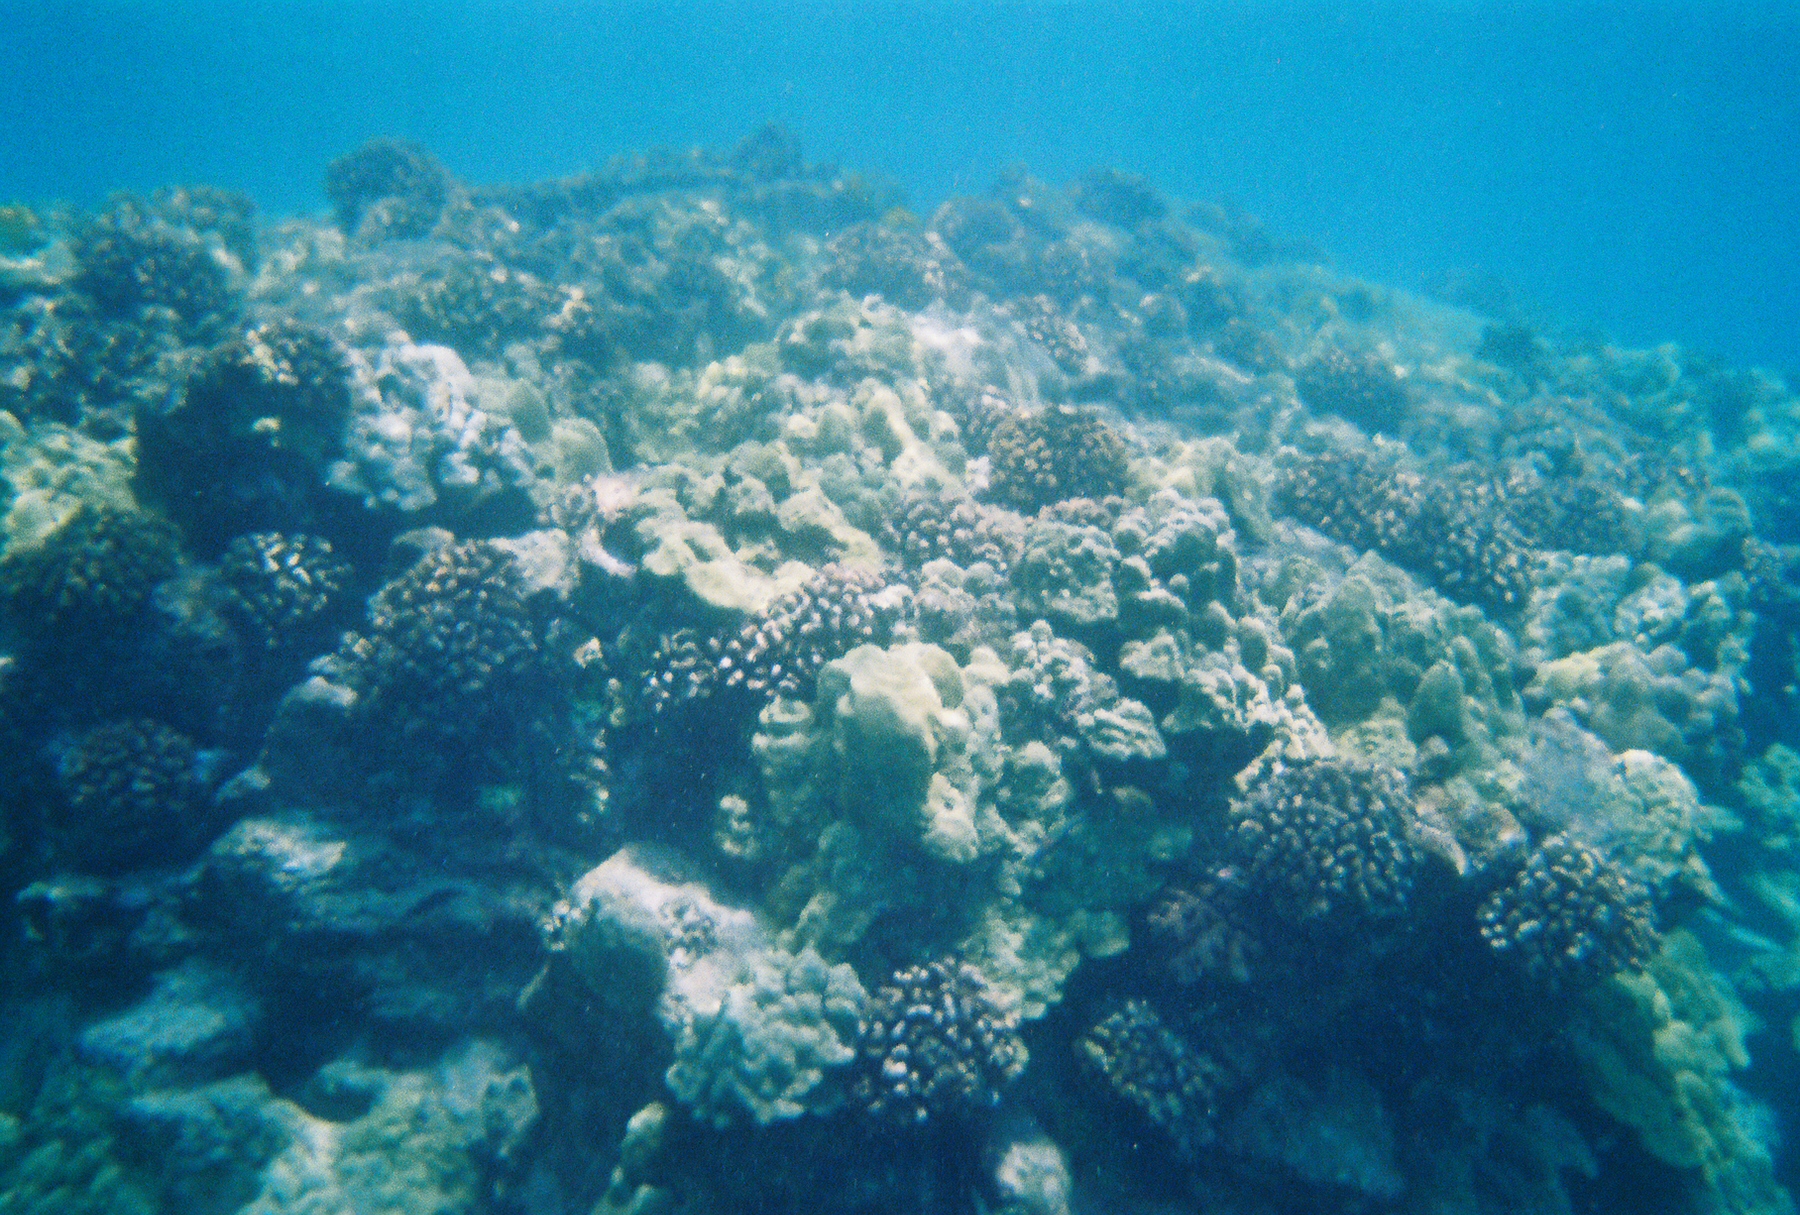 Reef wall in Kona, Hawaii in the Place of Refuge